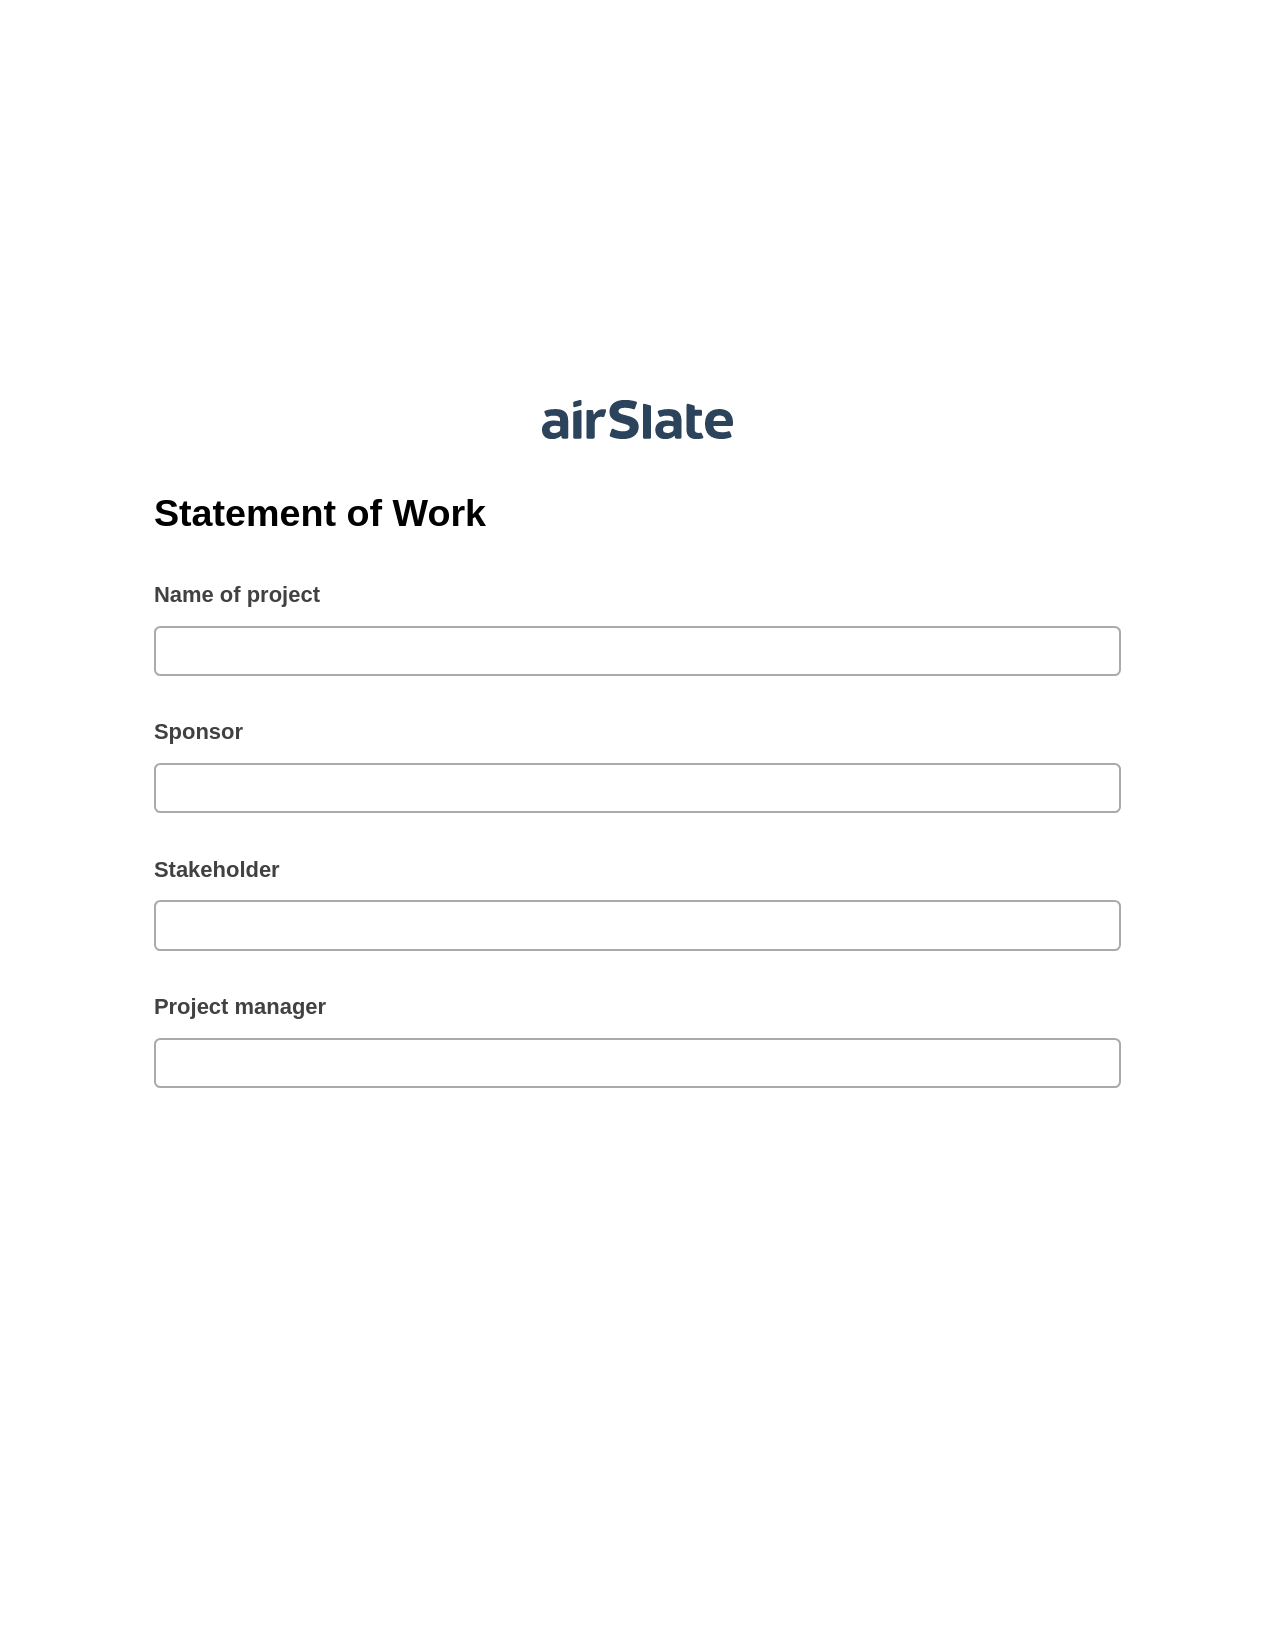 Statement of Work Pre-fill from CSV File Dropdown Options Bot, Lock the slate bot, Email Notification Postfinish Bot